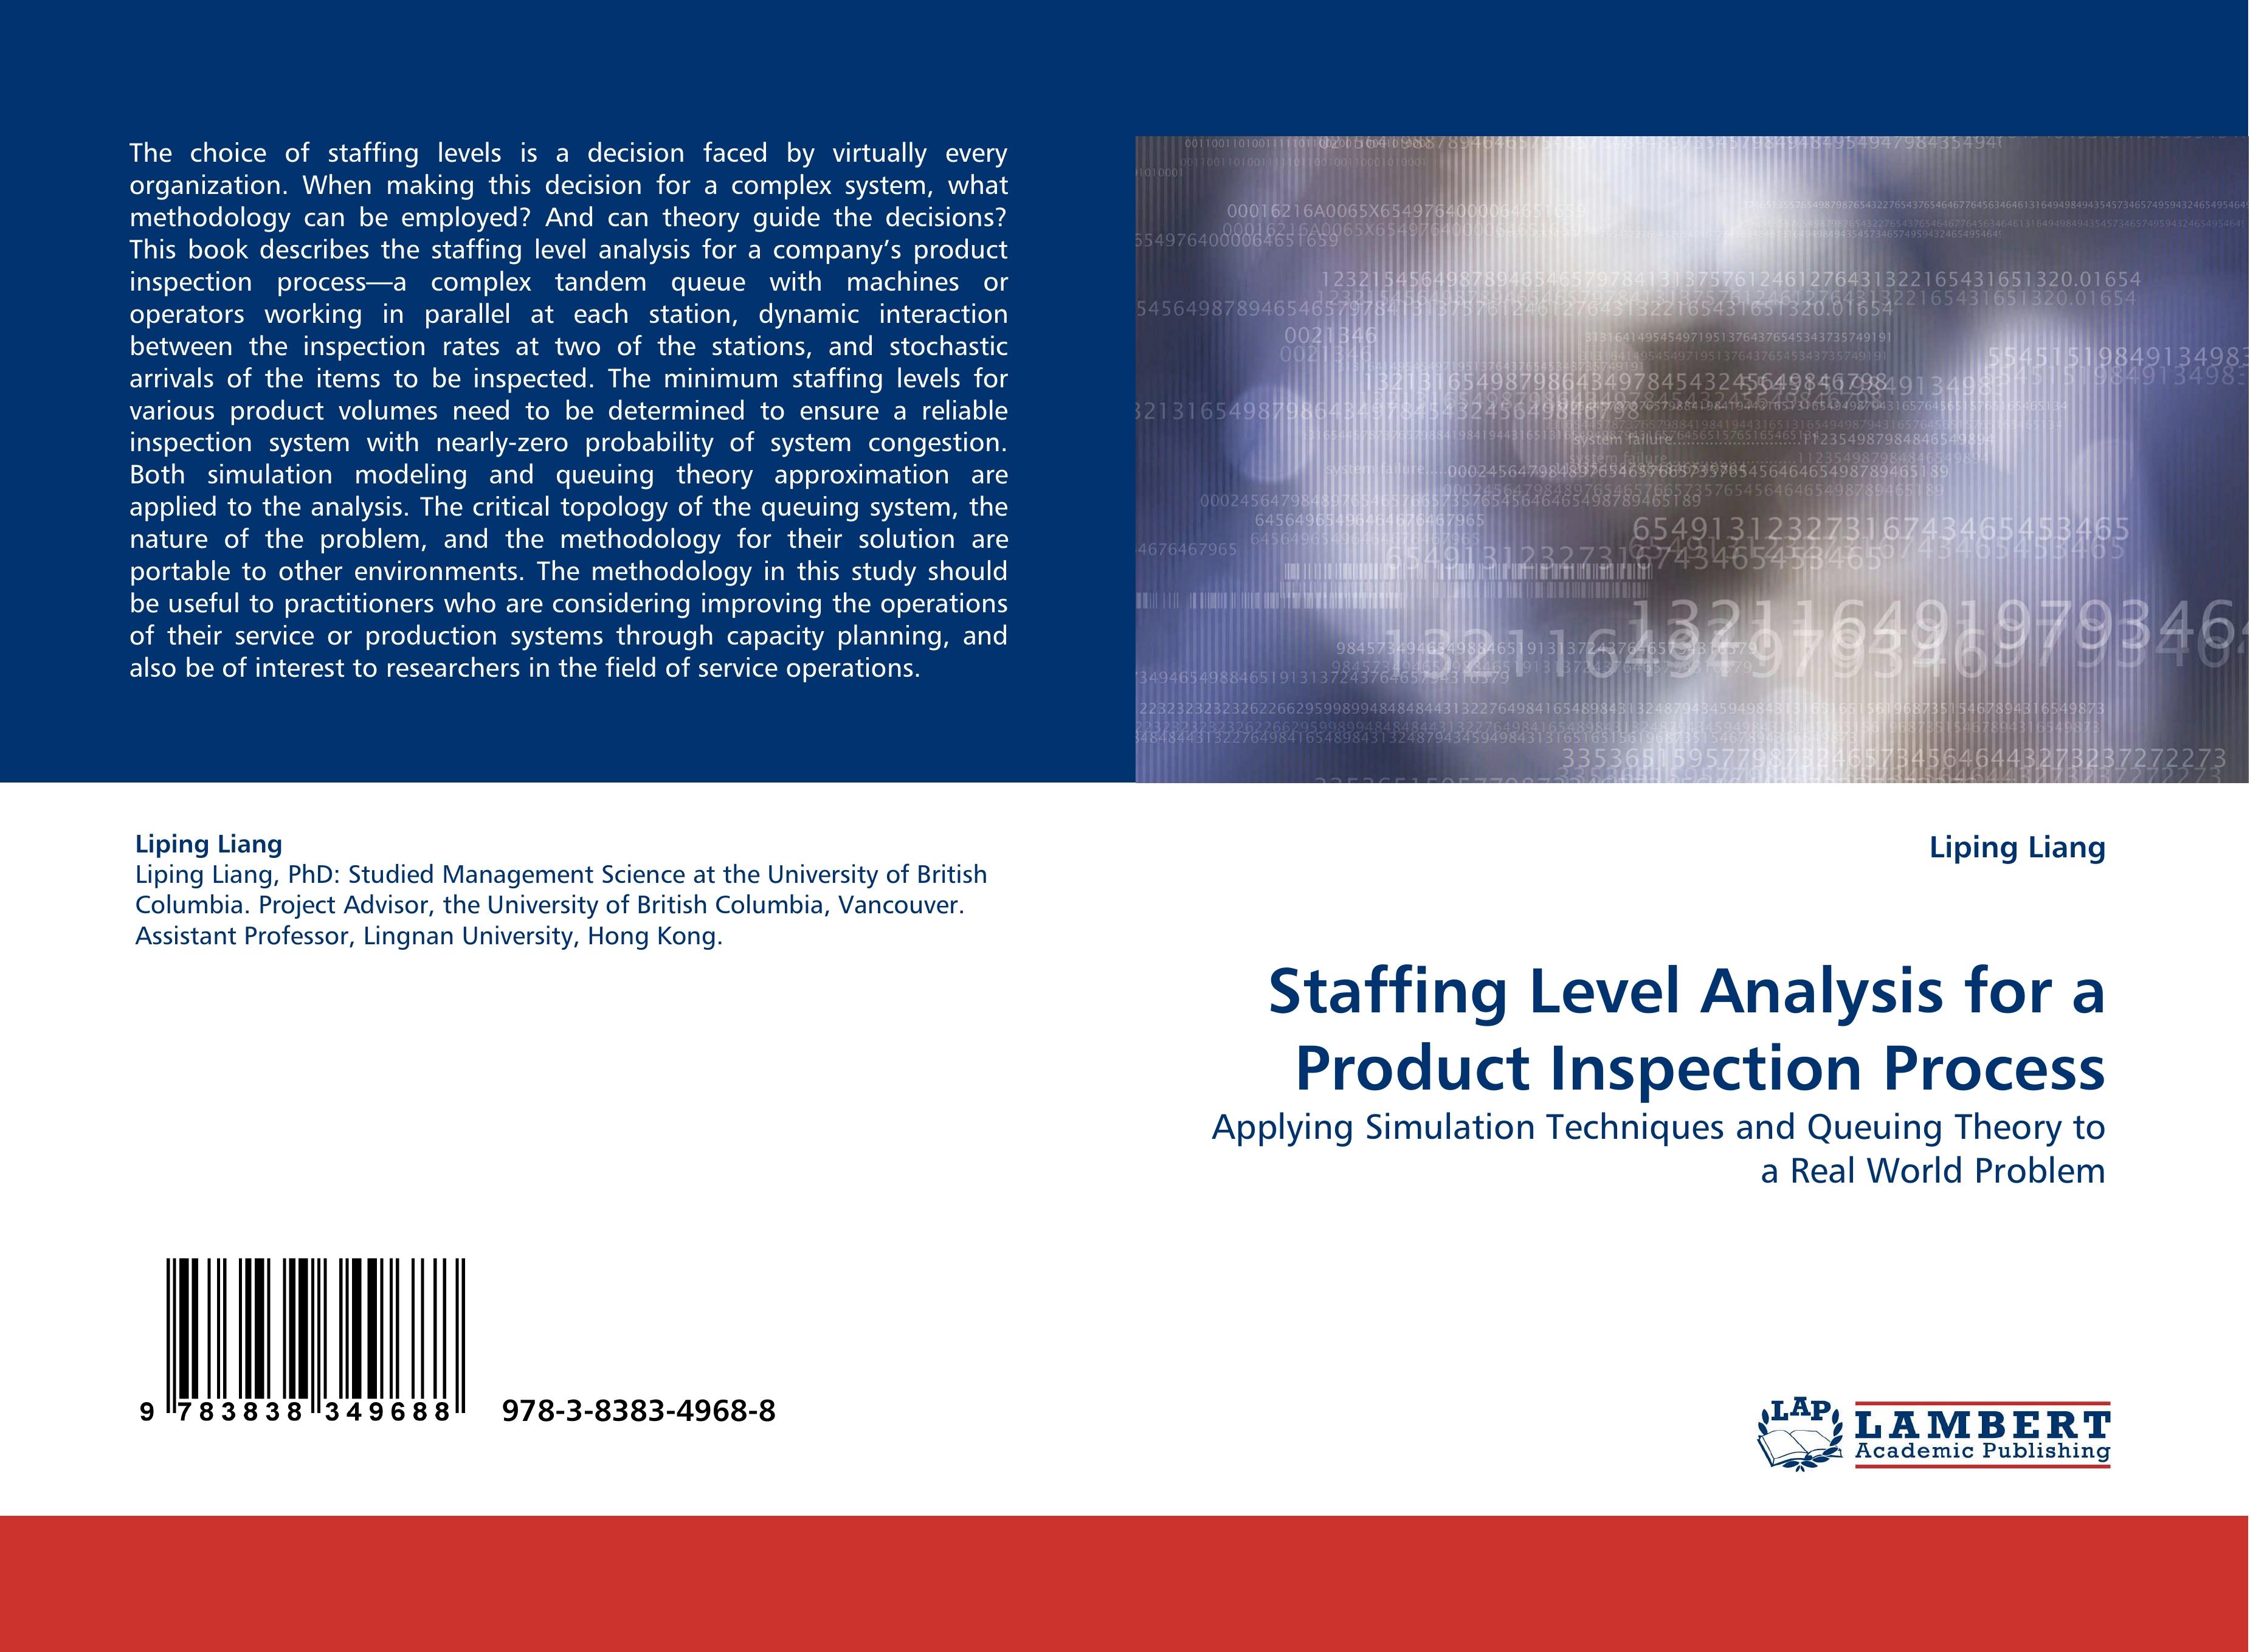 Staffing Level Analysis for a Product Inspection Process / Applying Simulation Techniques and Queuing Theory to a Real World Problem / Liping Liang / Taschenbuch / Paperback / 52 S. / Englisch / 2010 - Liang, Liping